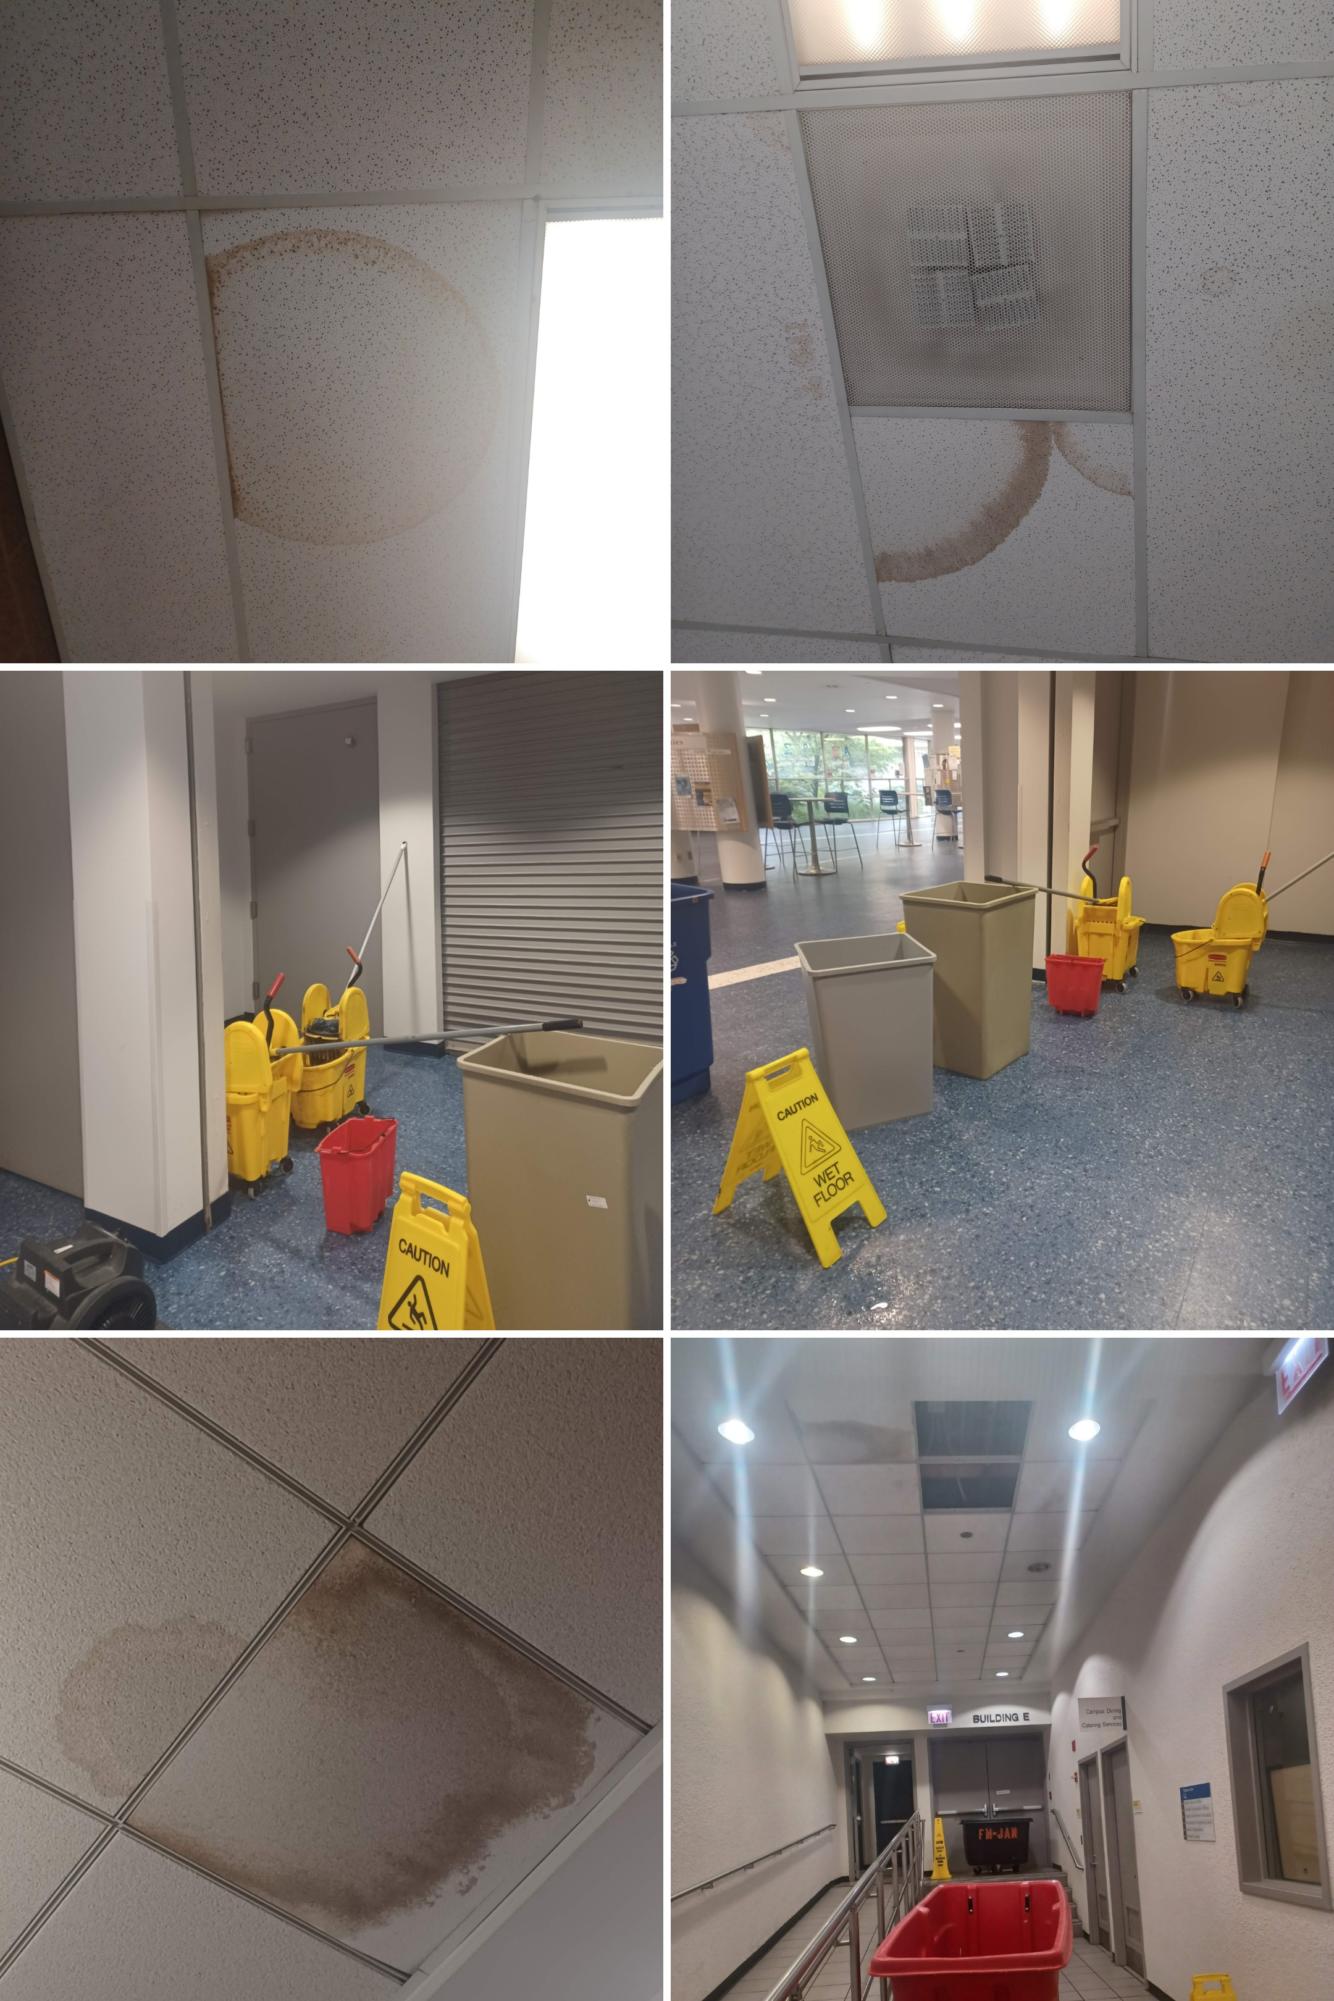 Photos on top are water damage on ceiling near FA 215.

Photos in center is buckets and mops collecting water leaks.

Photos in bottom are water damage in ceiling near the trash can collecting water leaks.